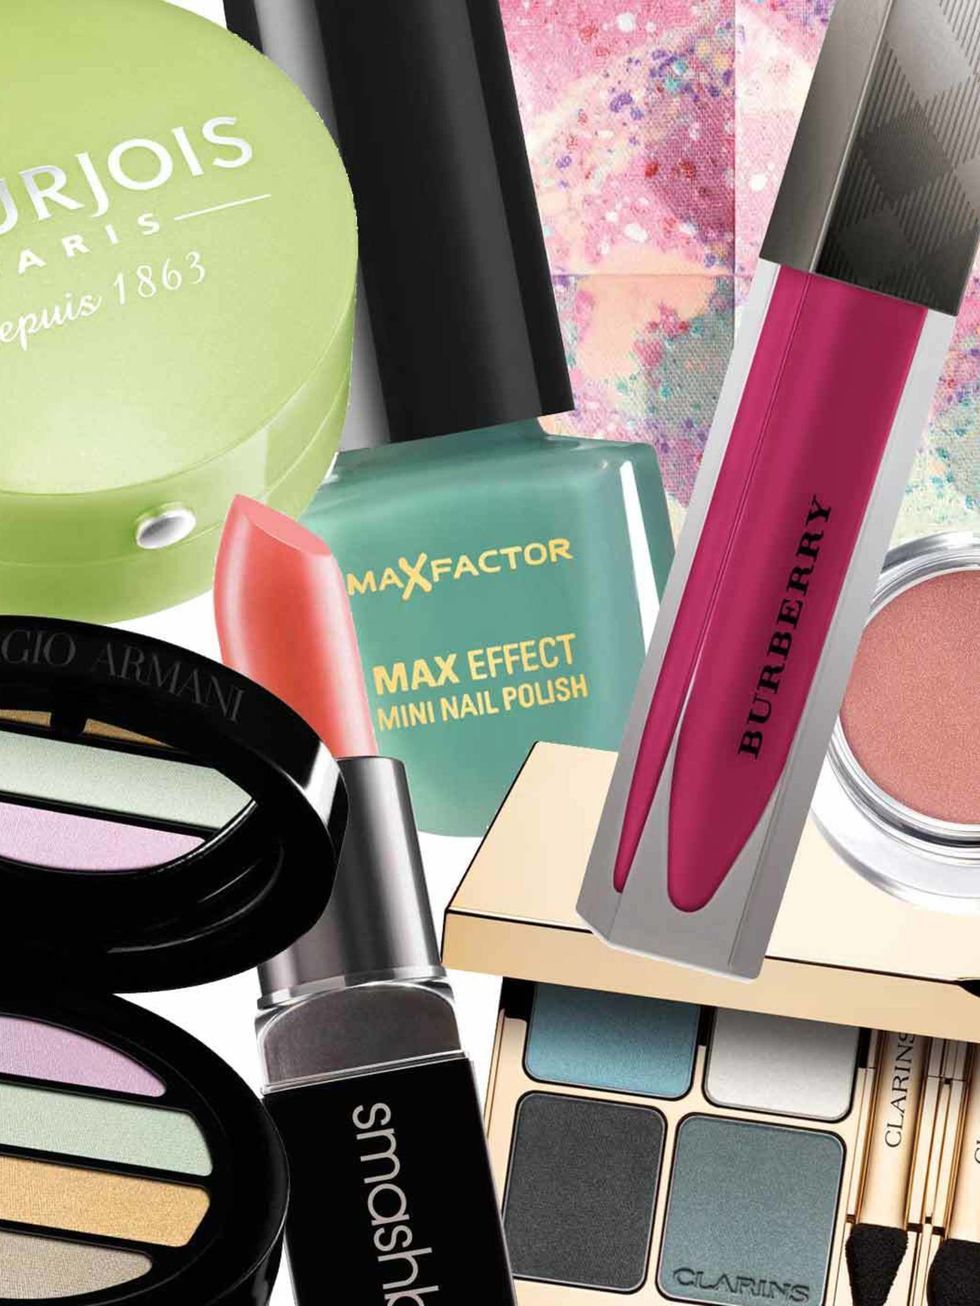 <p>February sees department store beauty halls filled with an injection of colour thanks to the spring product launches. With plenty of limited edition and just downright covetable products going on sale its worth snapping up your new season essentials n